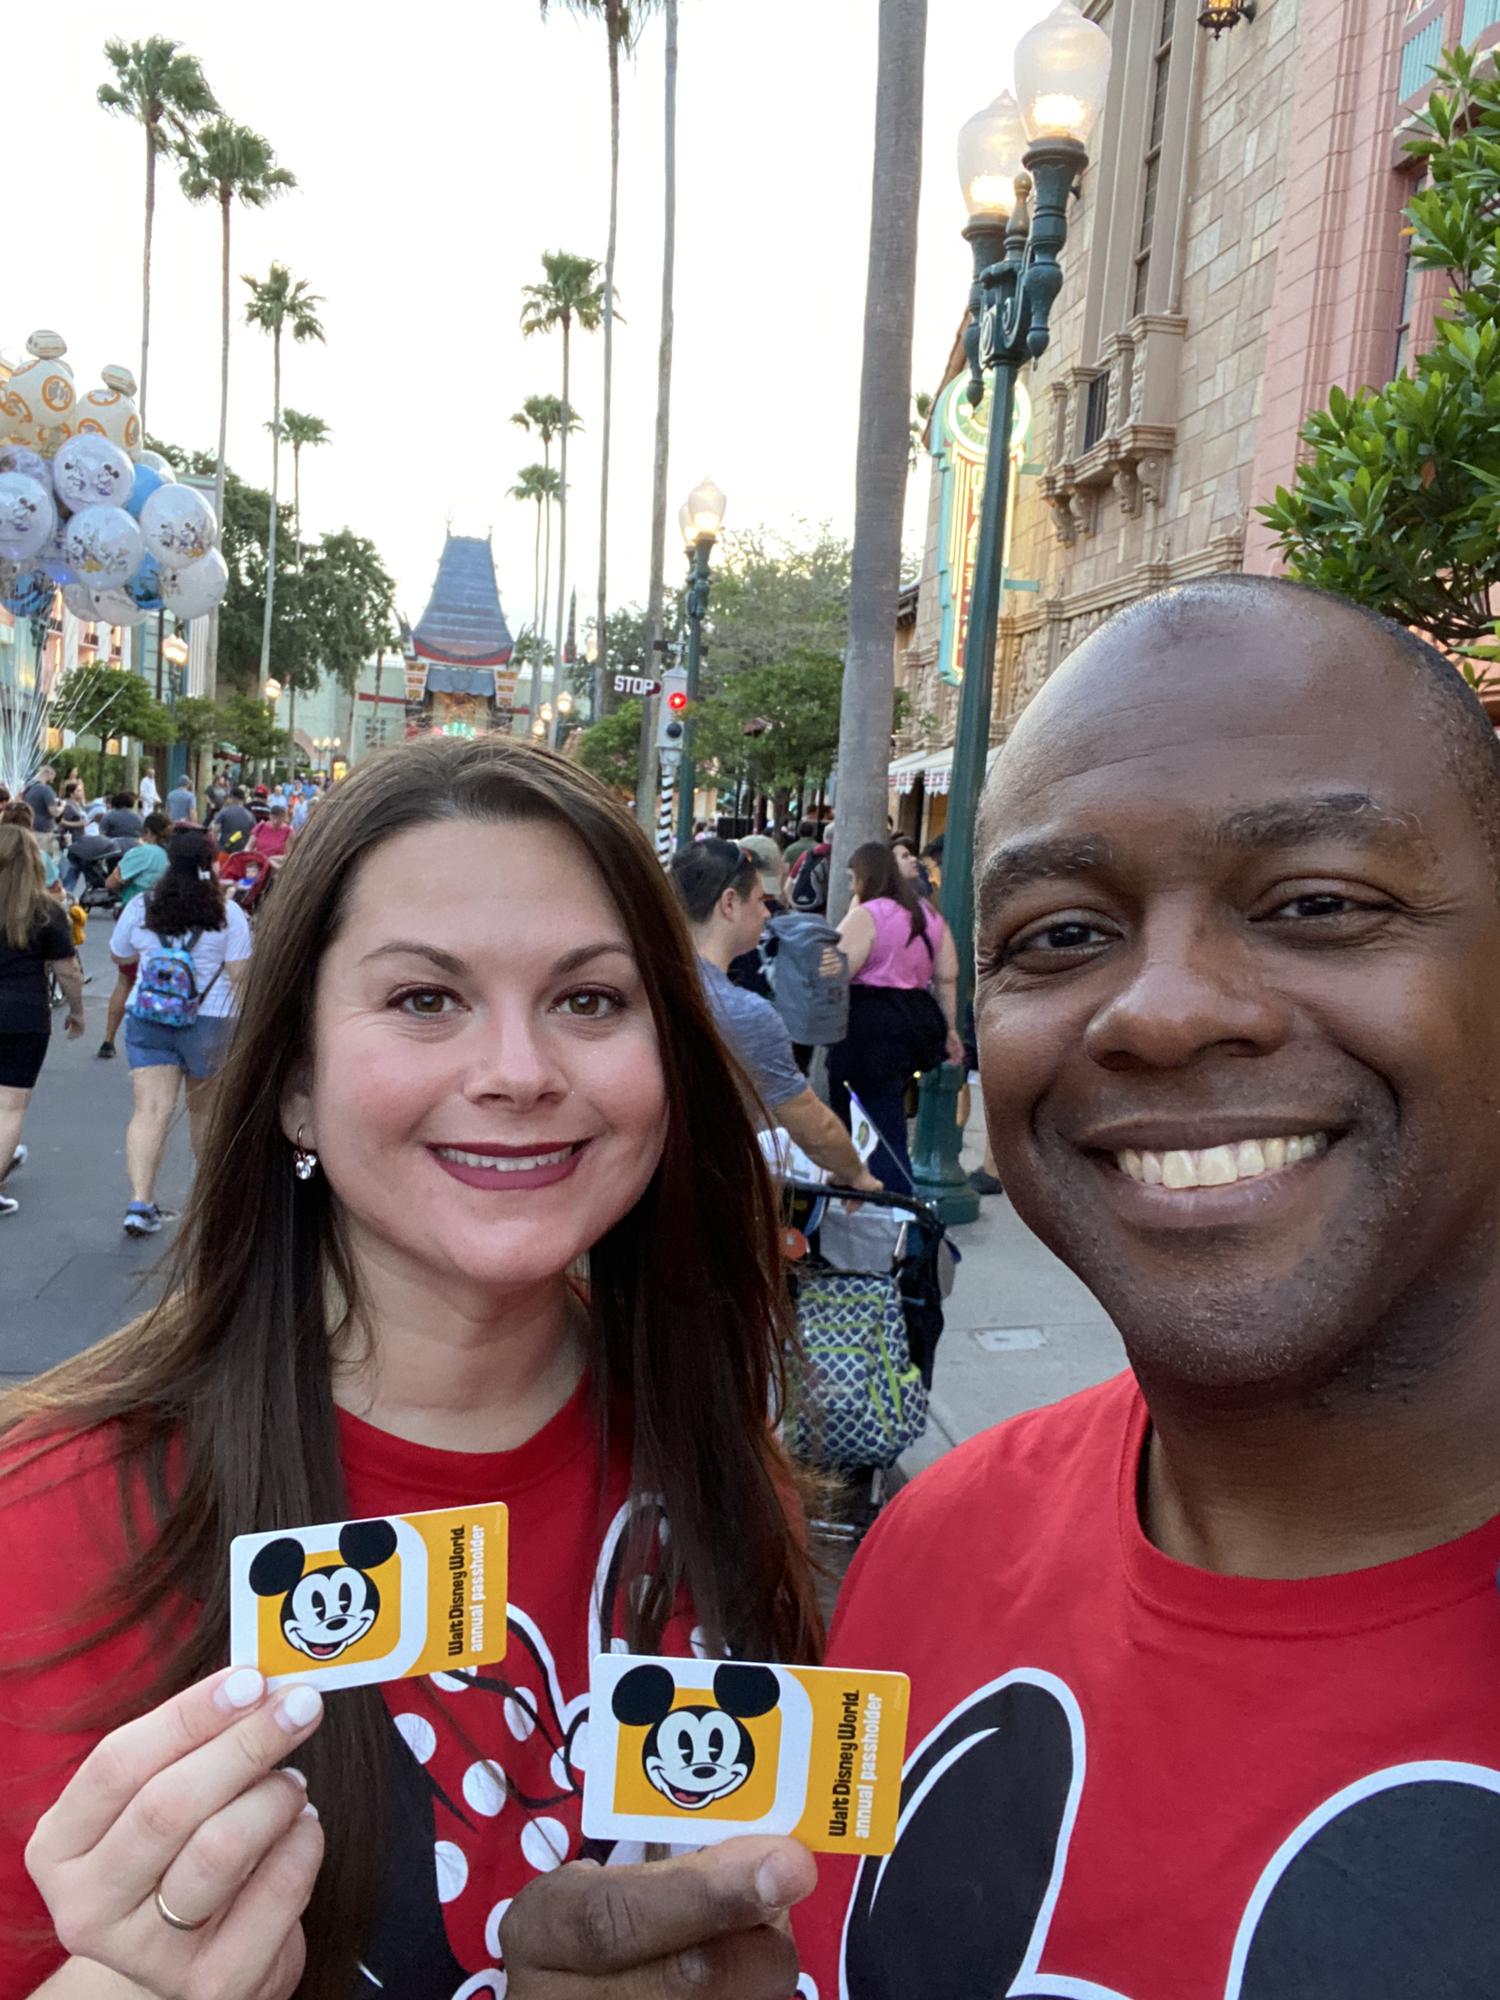 Official Disney Annual Passholders